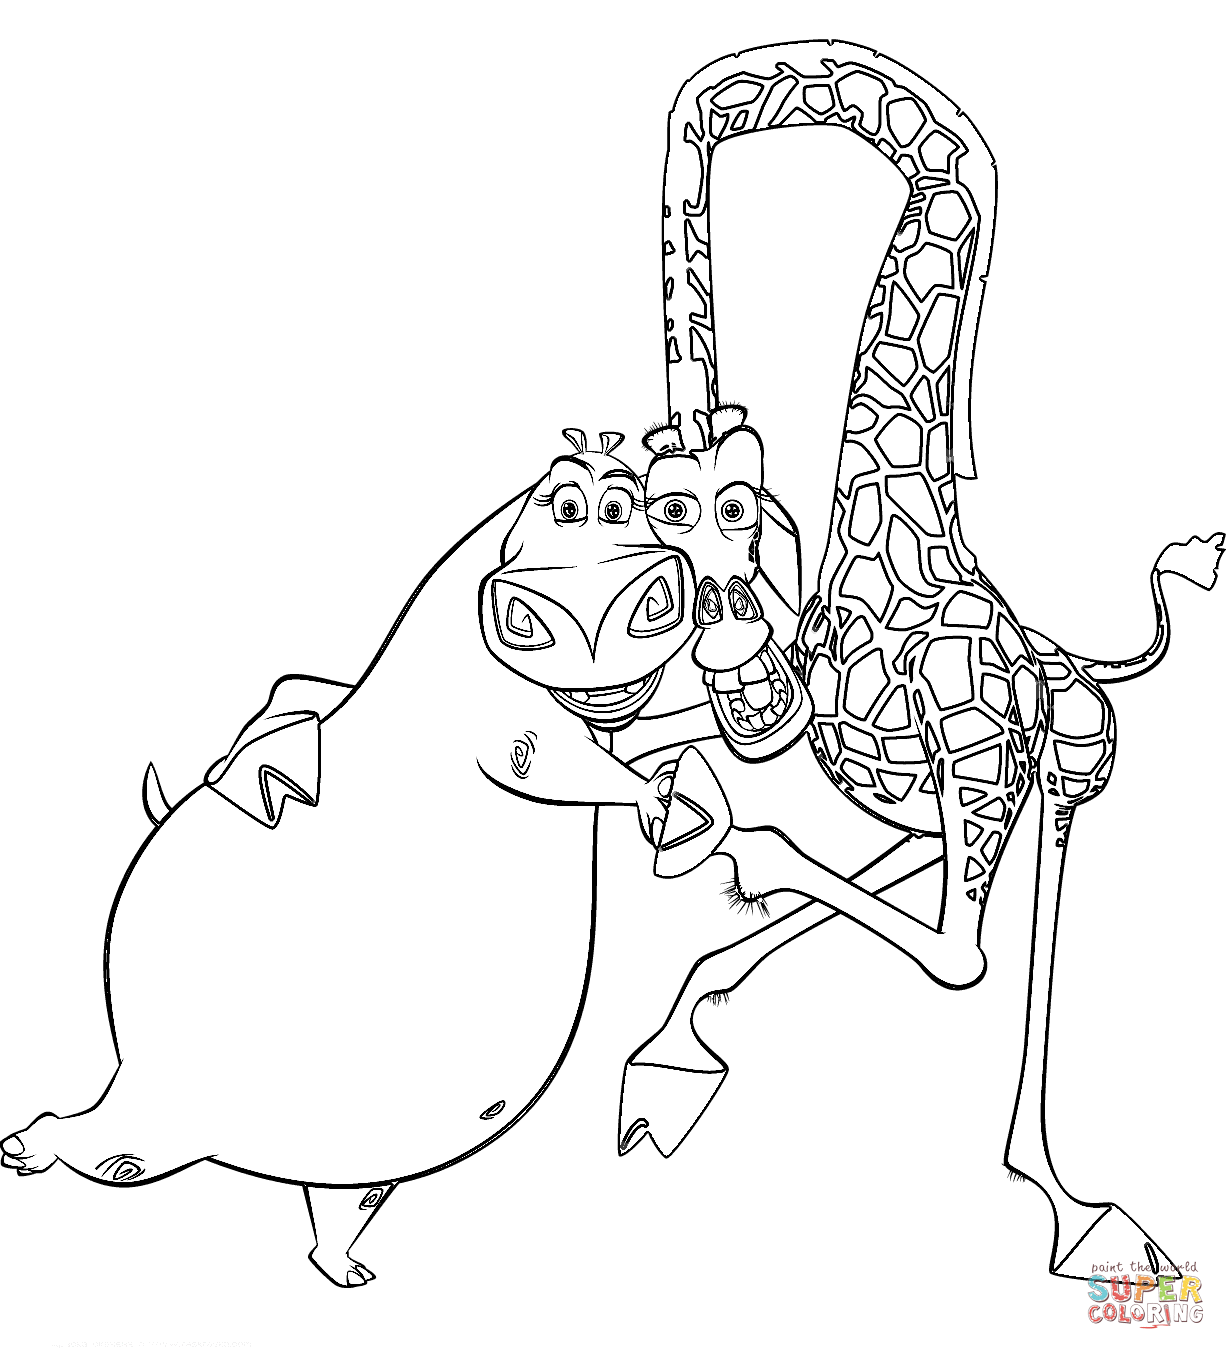 Gloria And Melman coloring page | Free Printable Coloring Pages